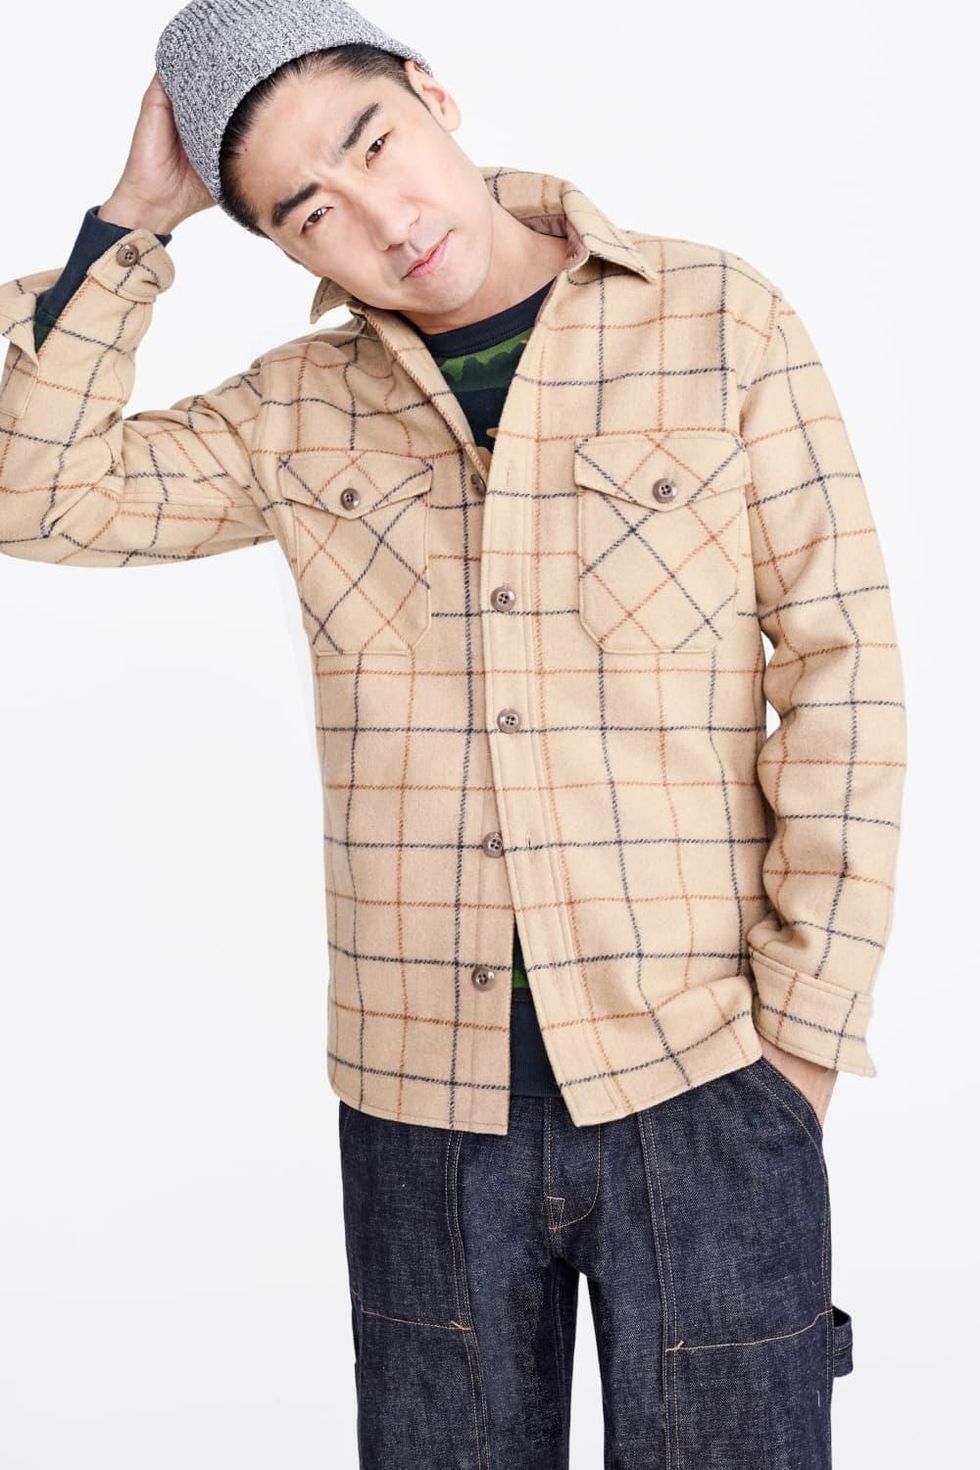 J Crew fall collection mens look 19 James